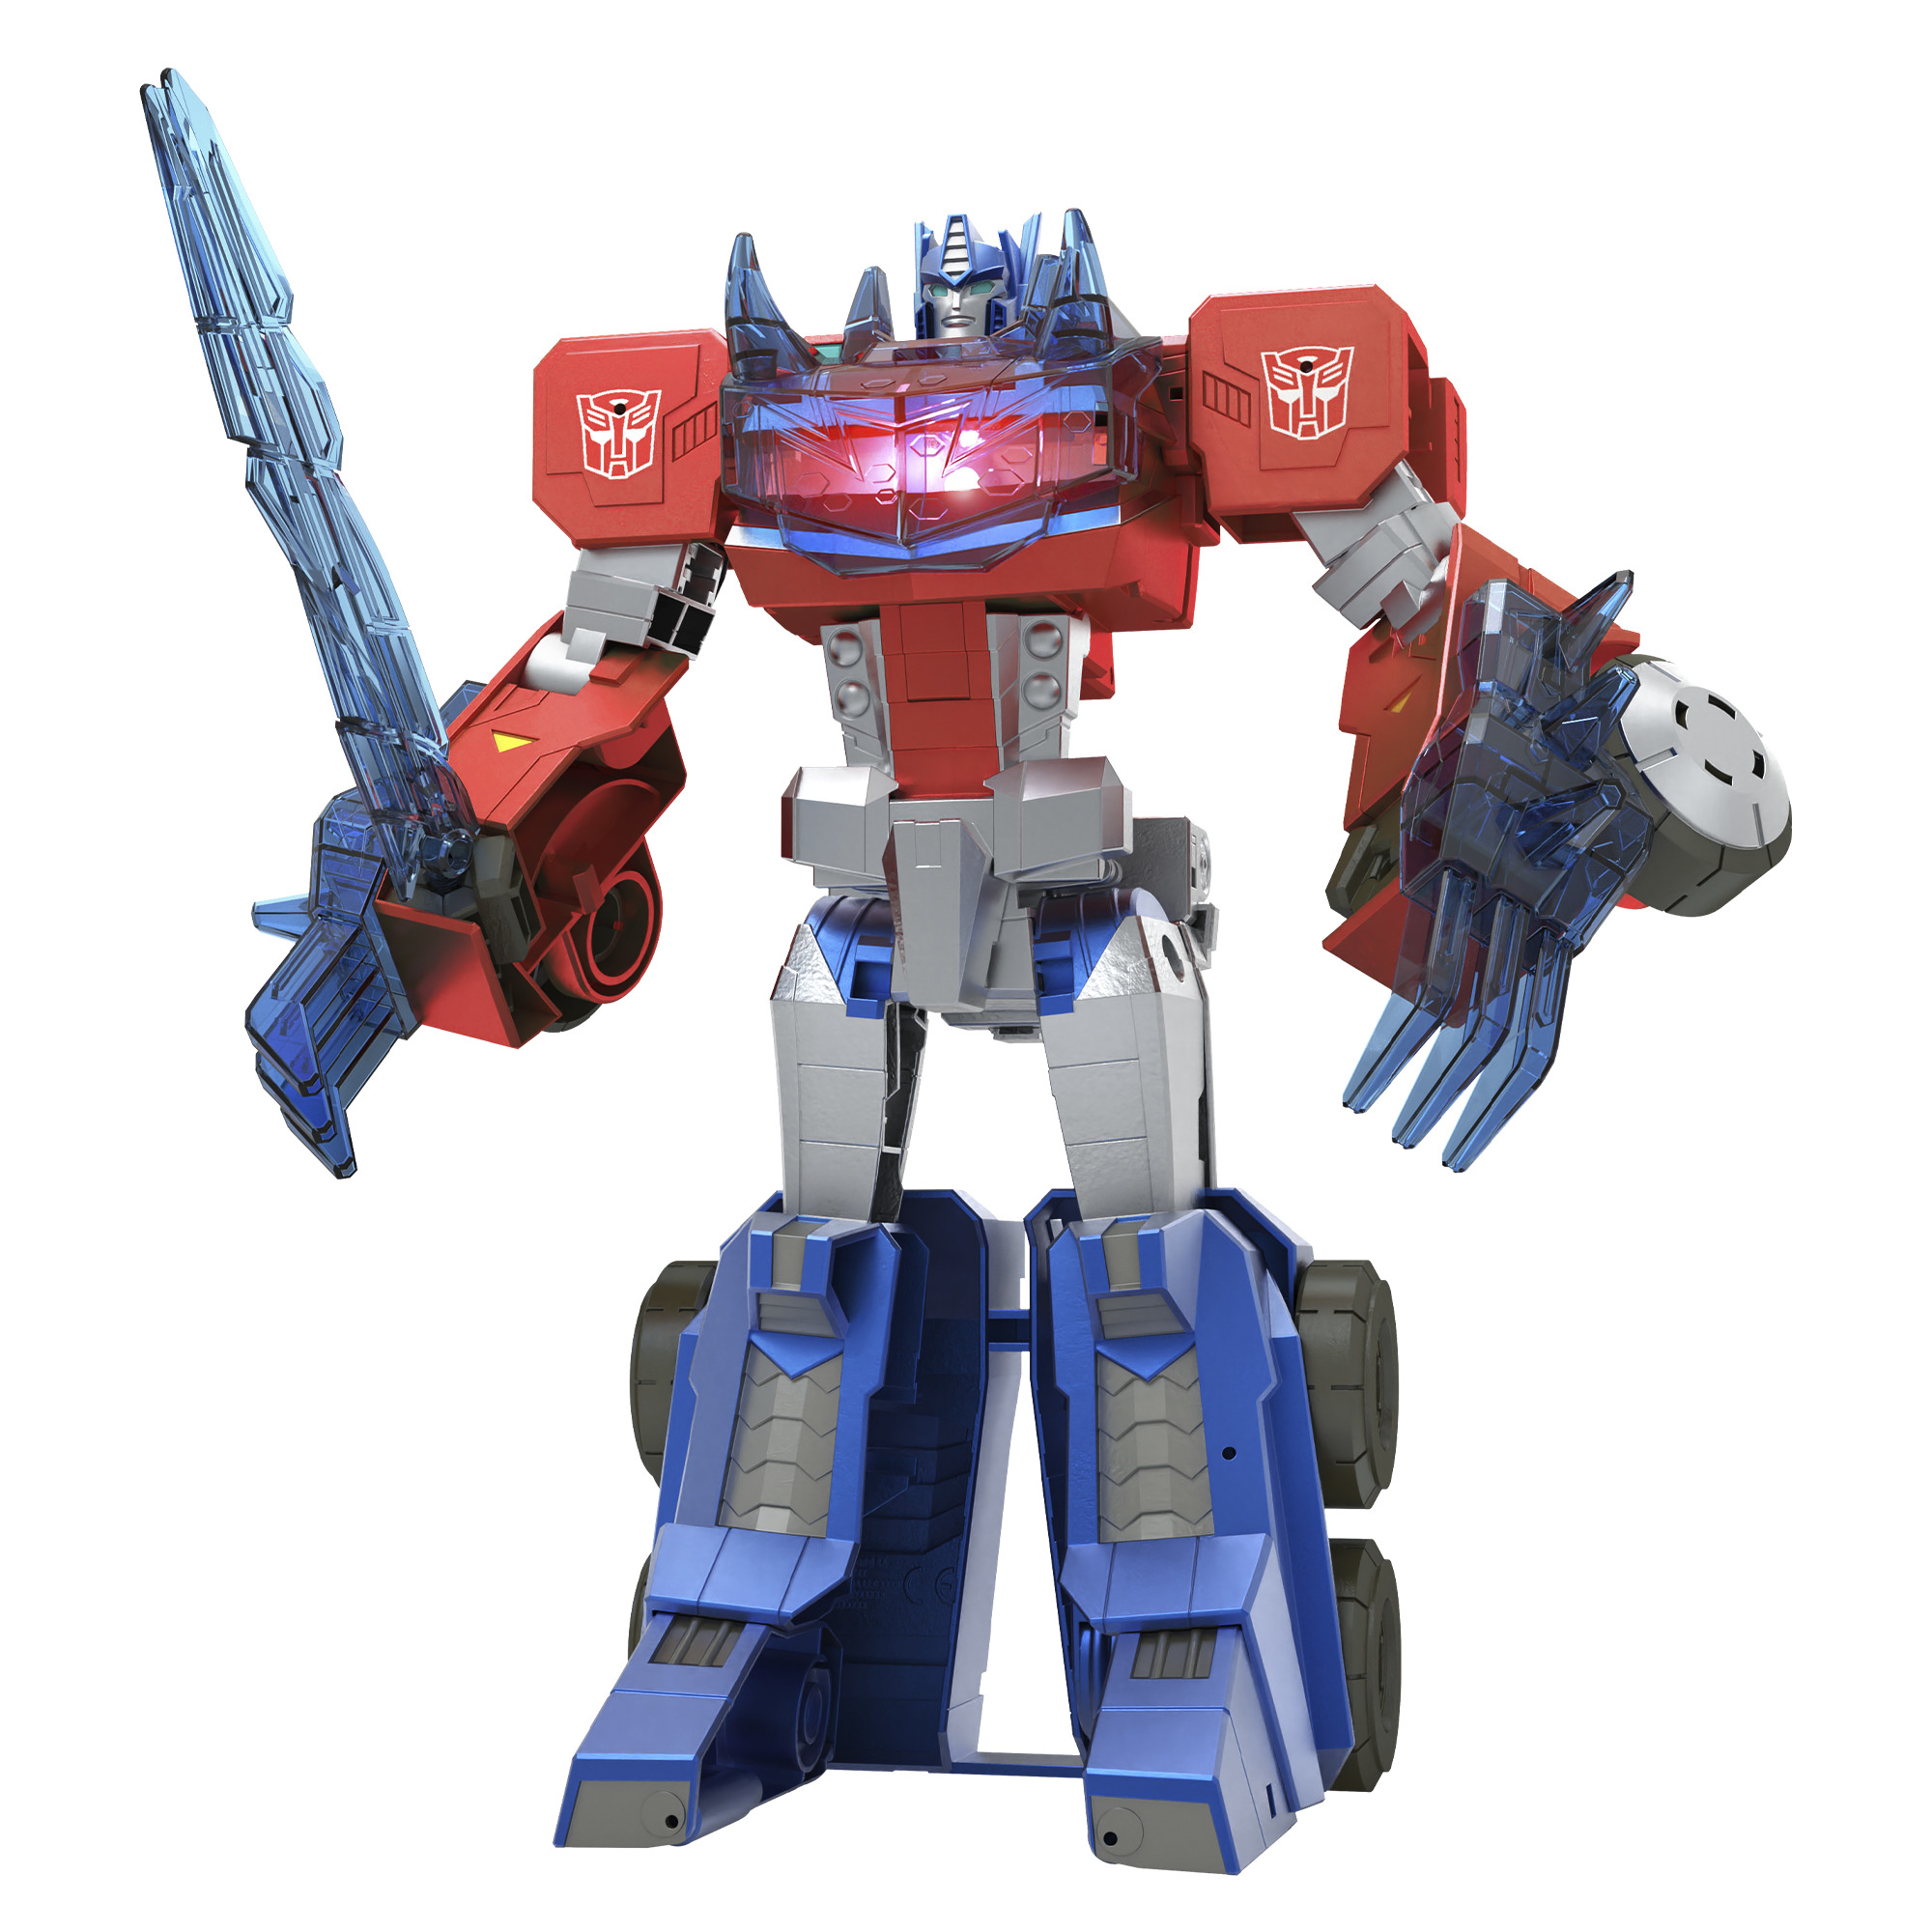 Transformers Cyberverse Roll And Convert Hahmo Optimus Prime